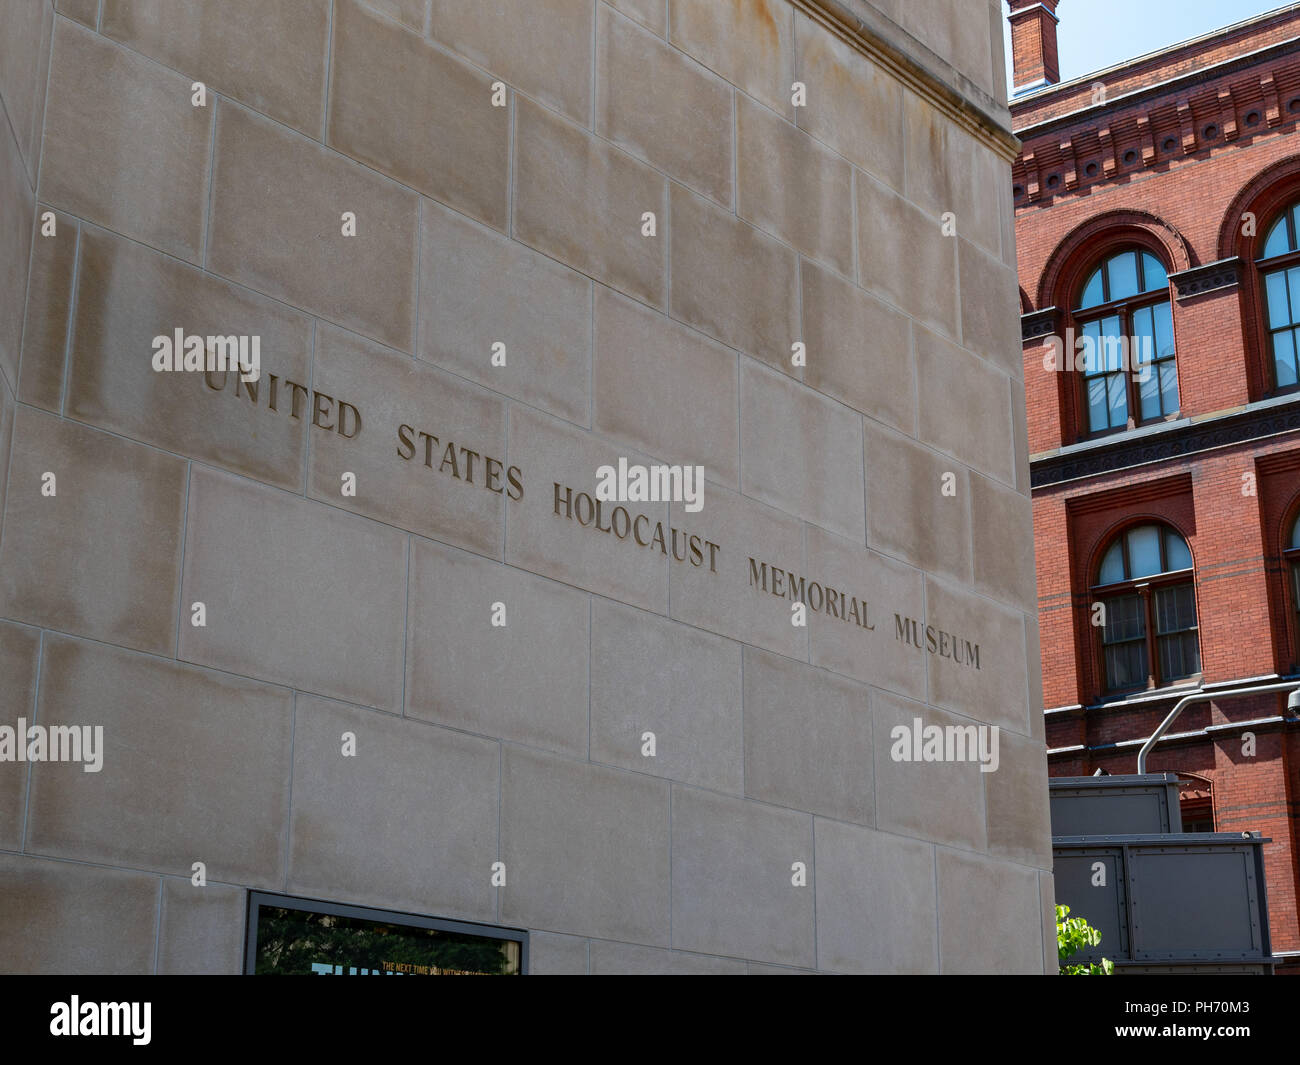 United States Holocaust Memorial Museum entrance sign outside of building   Stock Photo